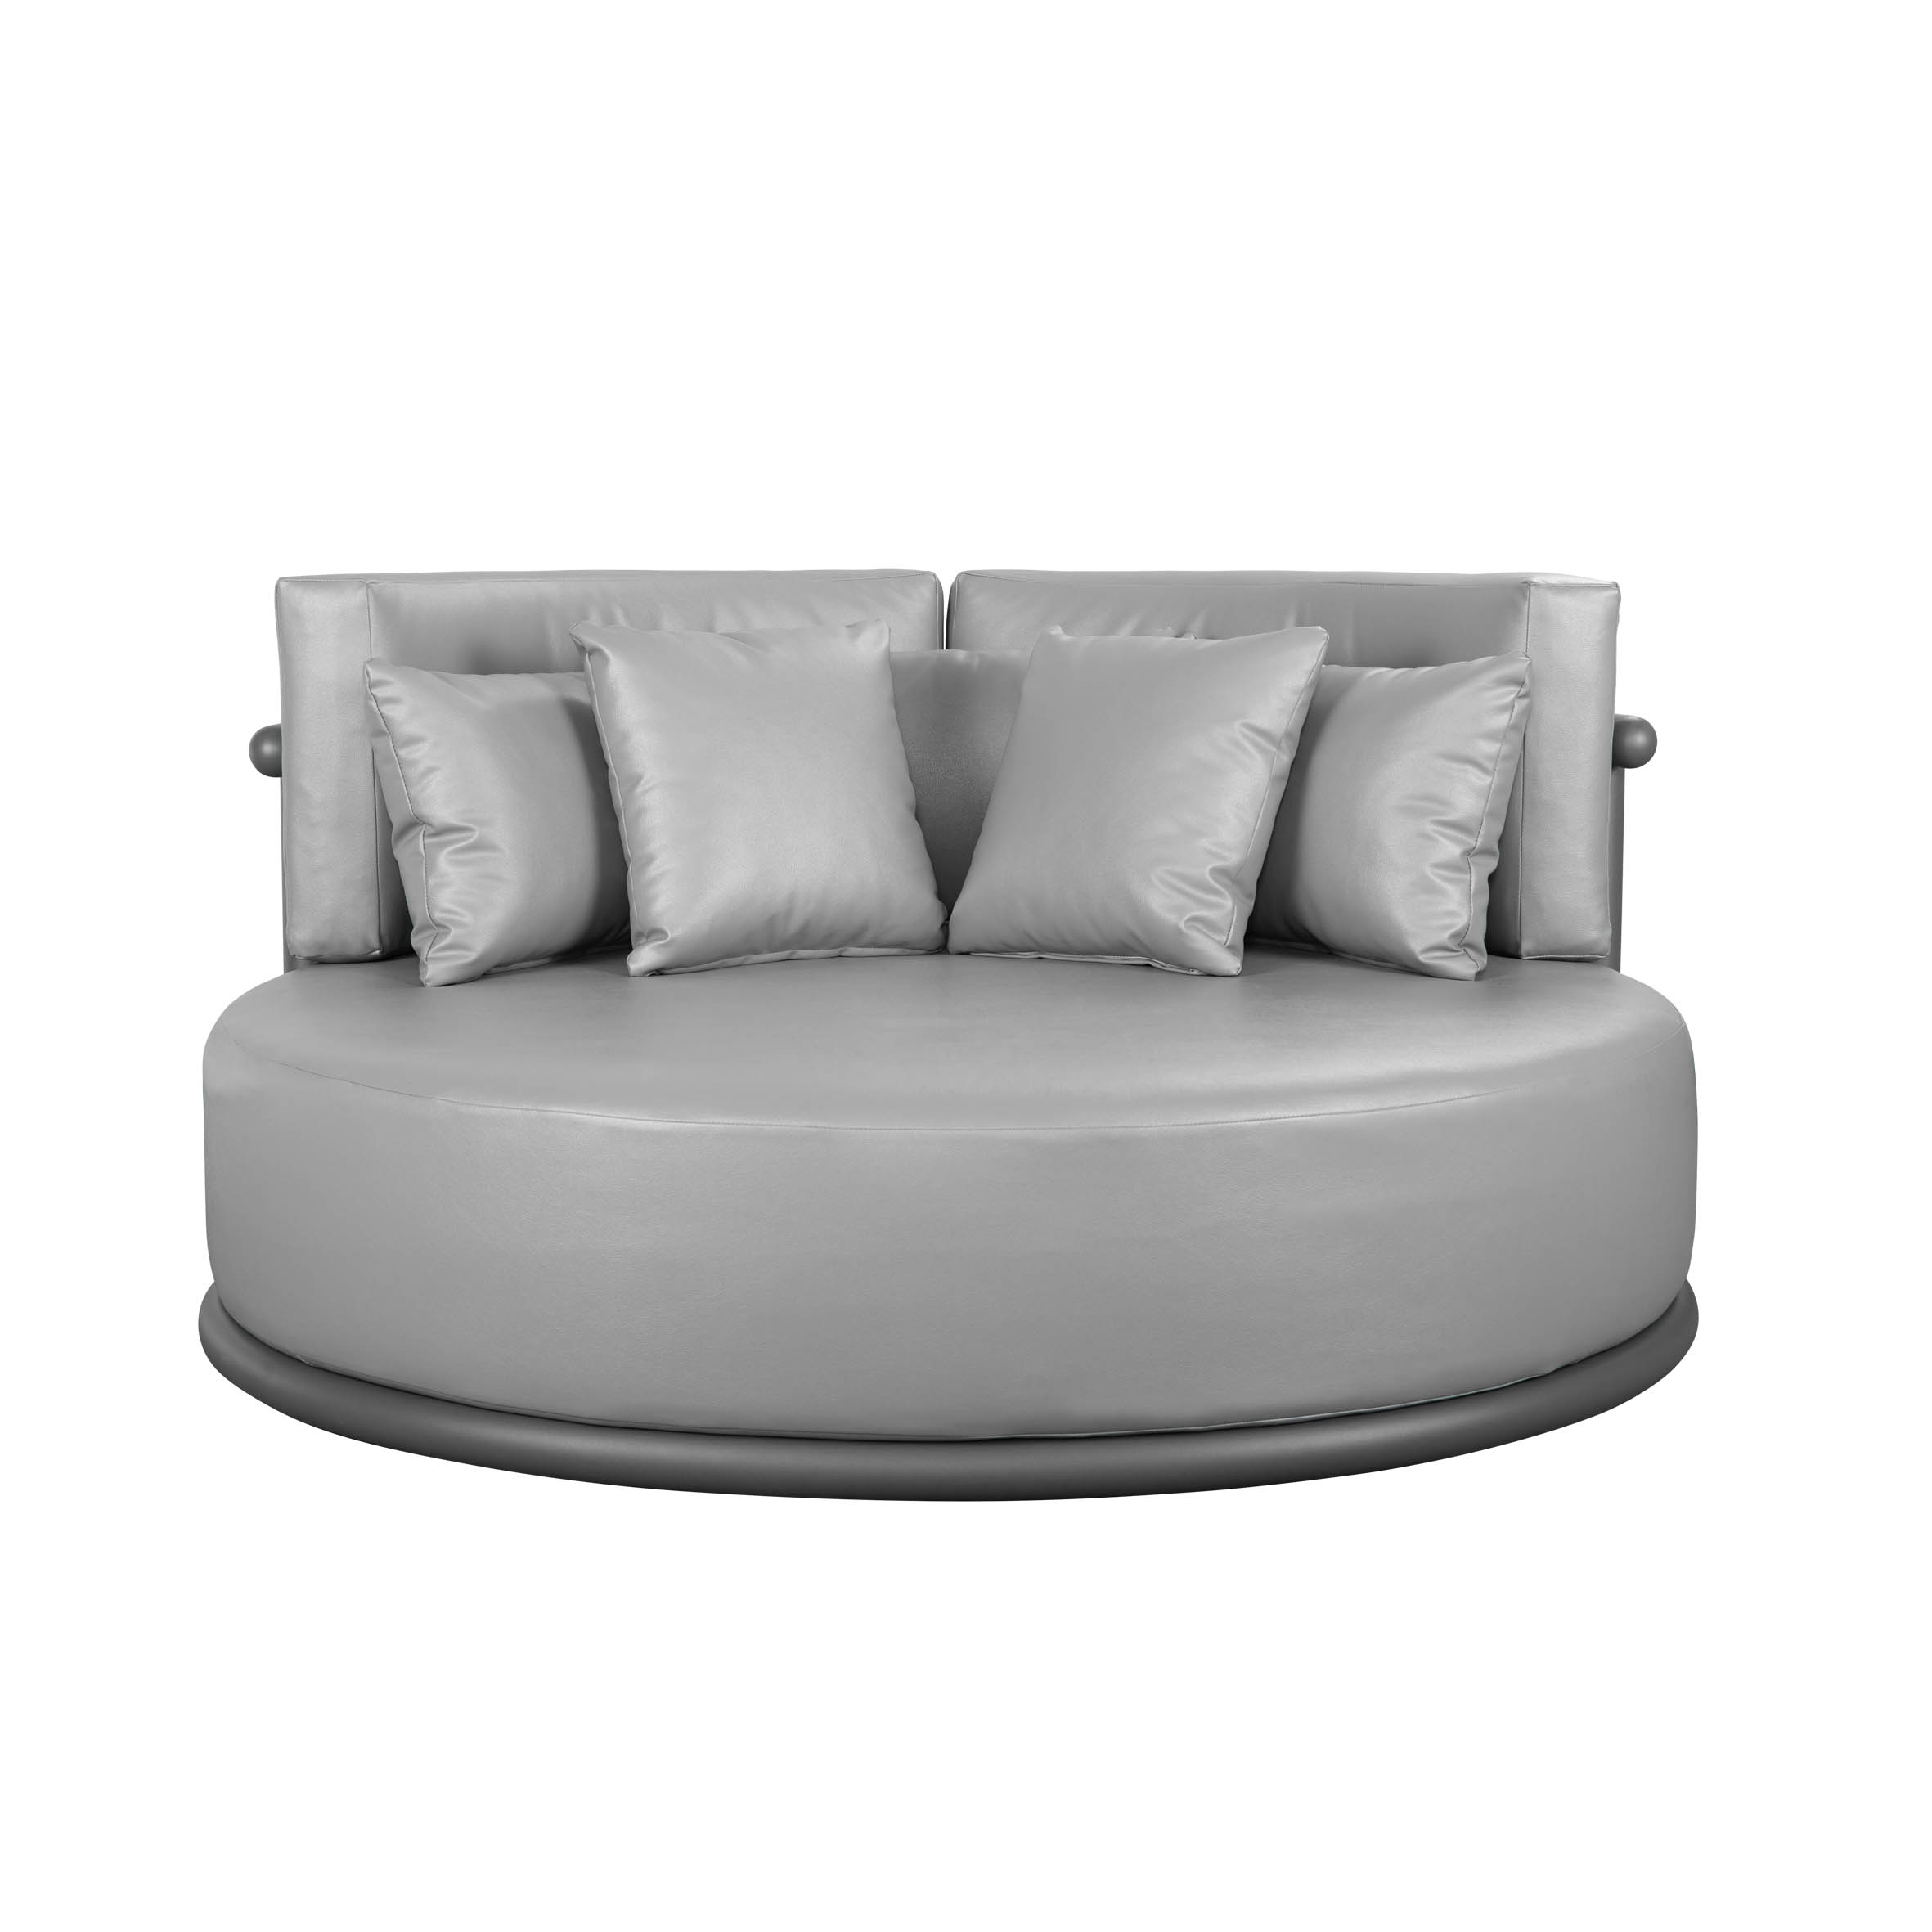 Armani alu.round daybed S6